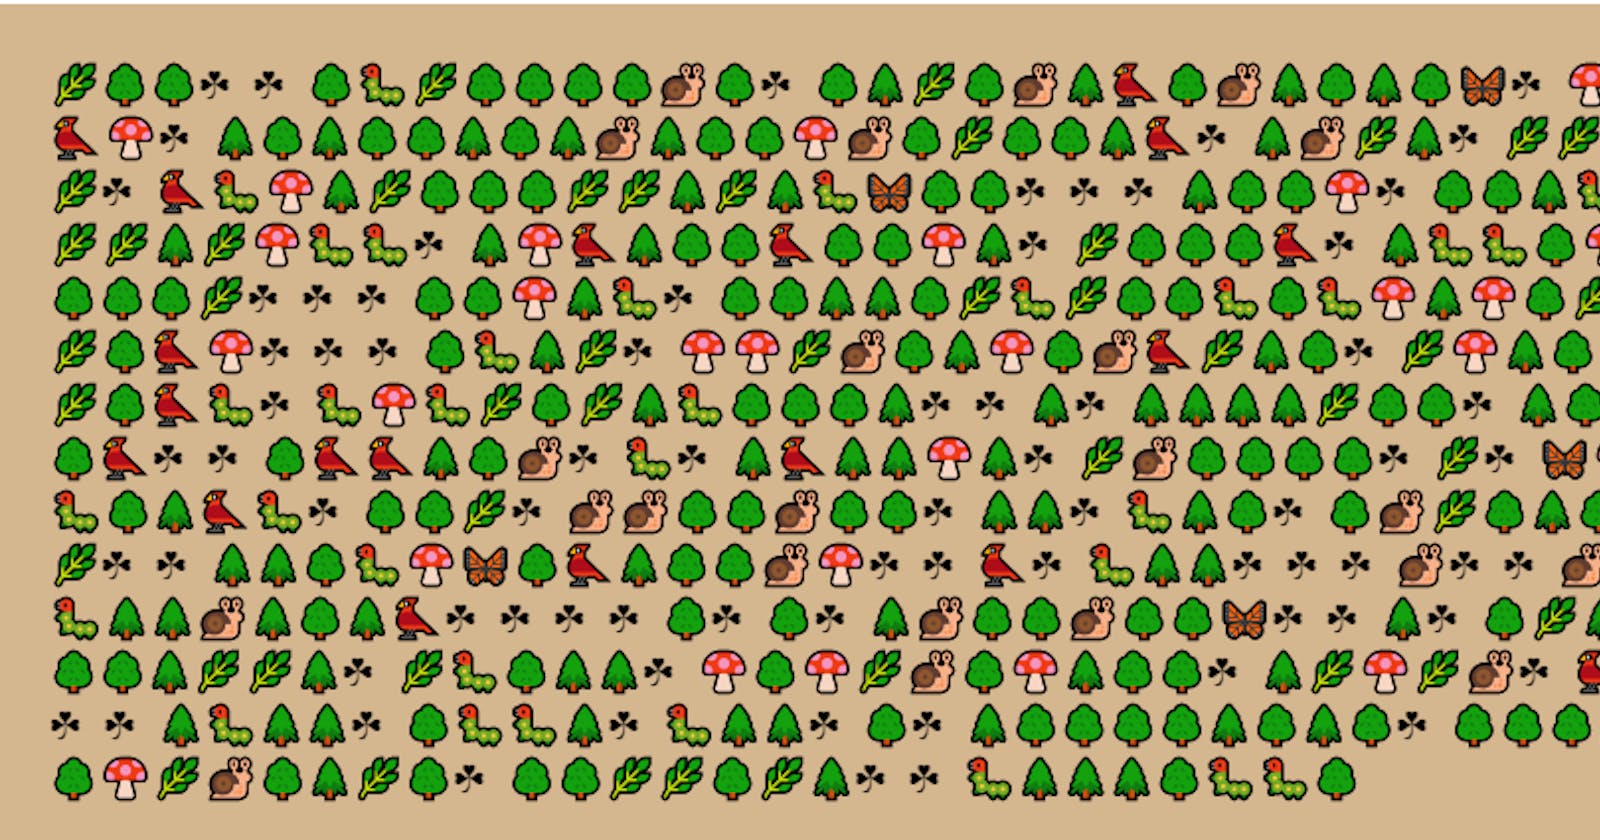 Making Emoji Forest, the Text forest